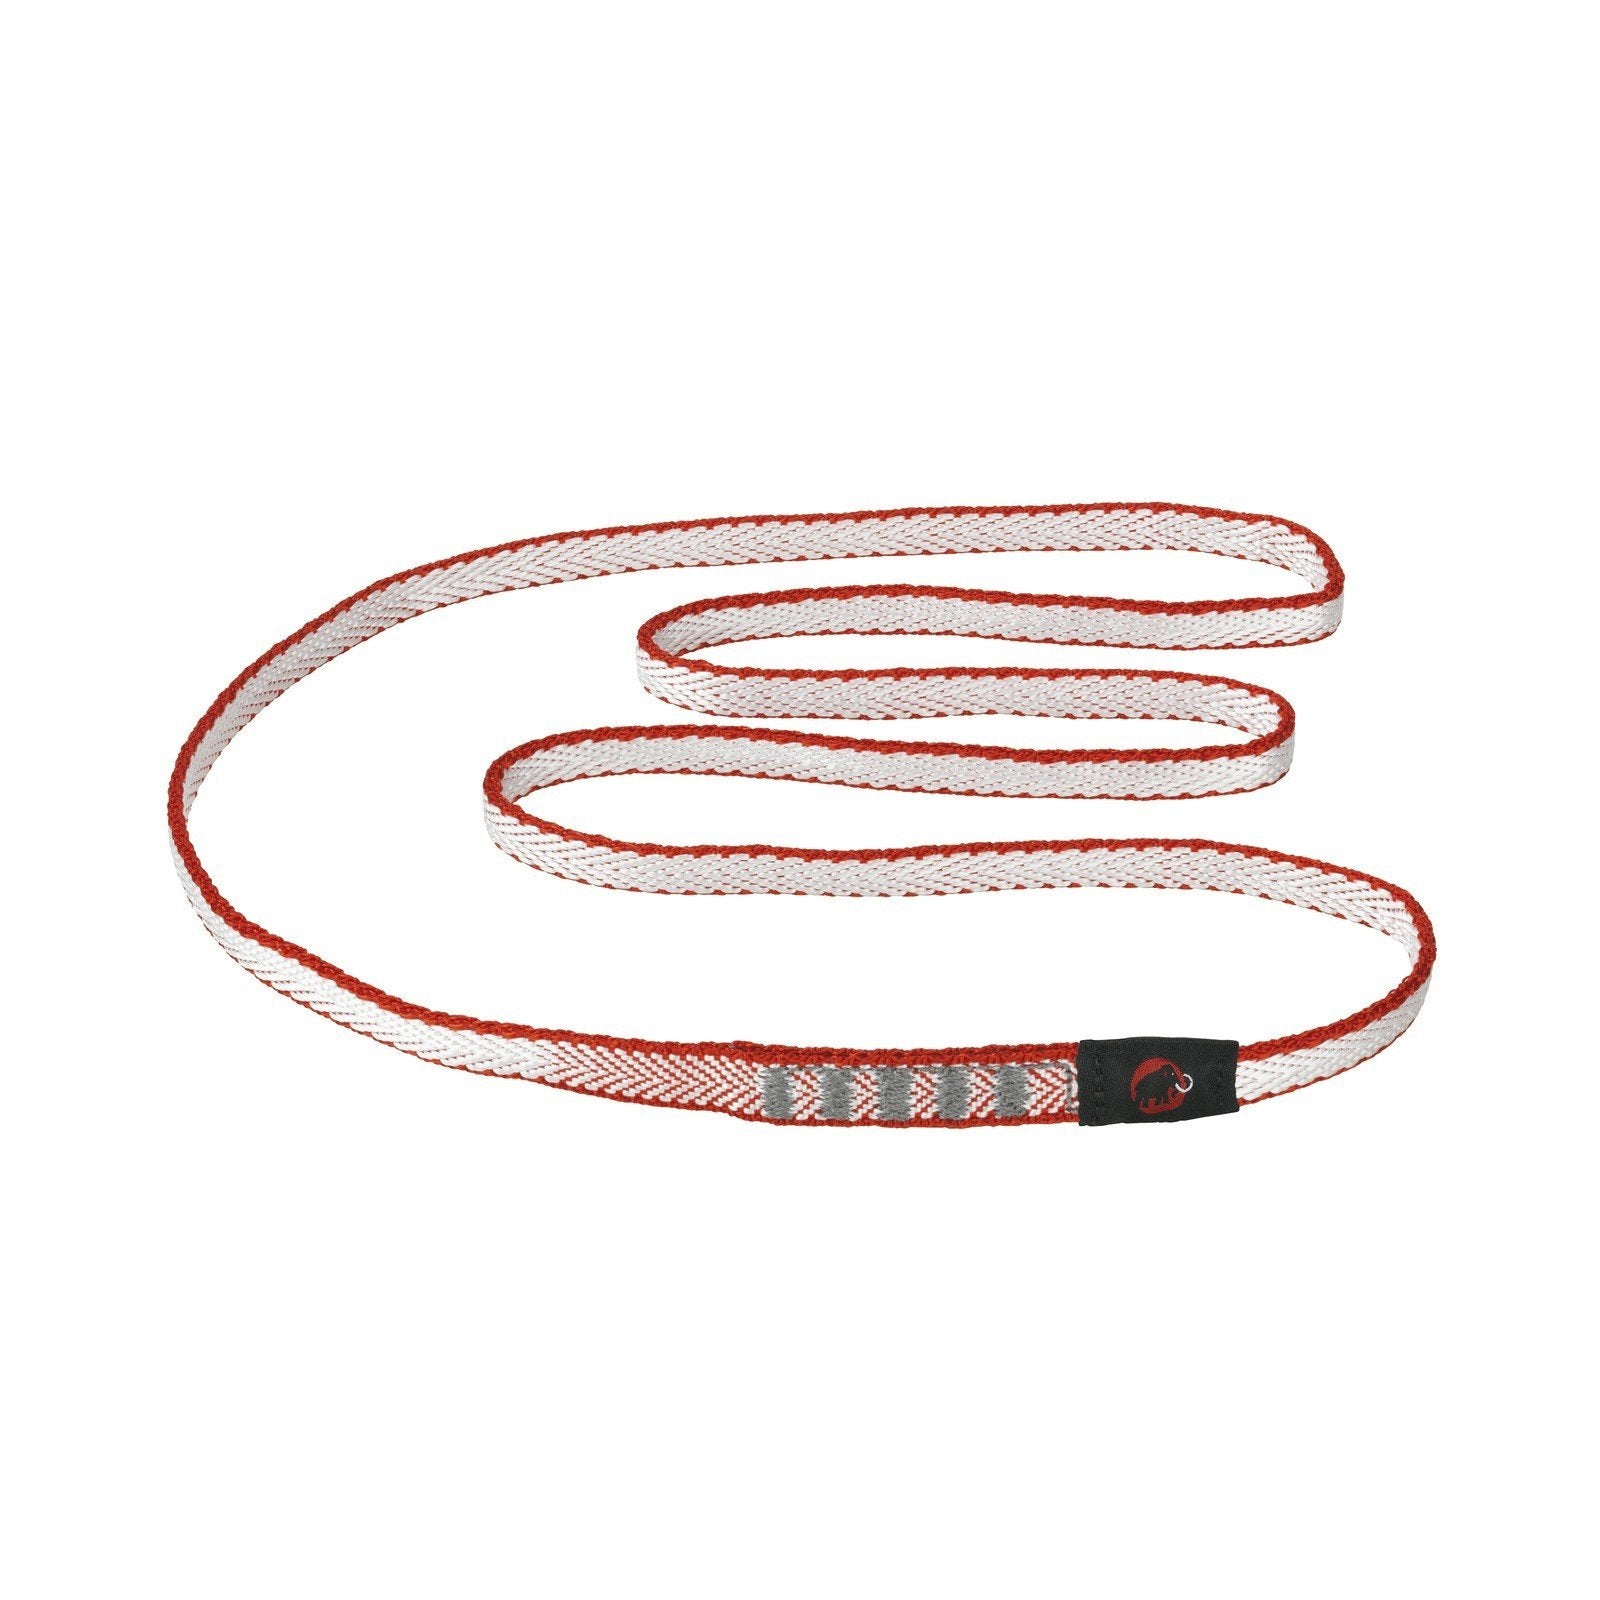 Mammut Contact Dyneema climbing sling 8mm x 60cm, in red colour